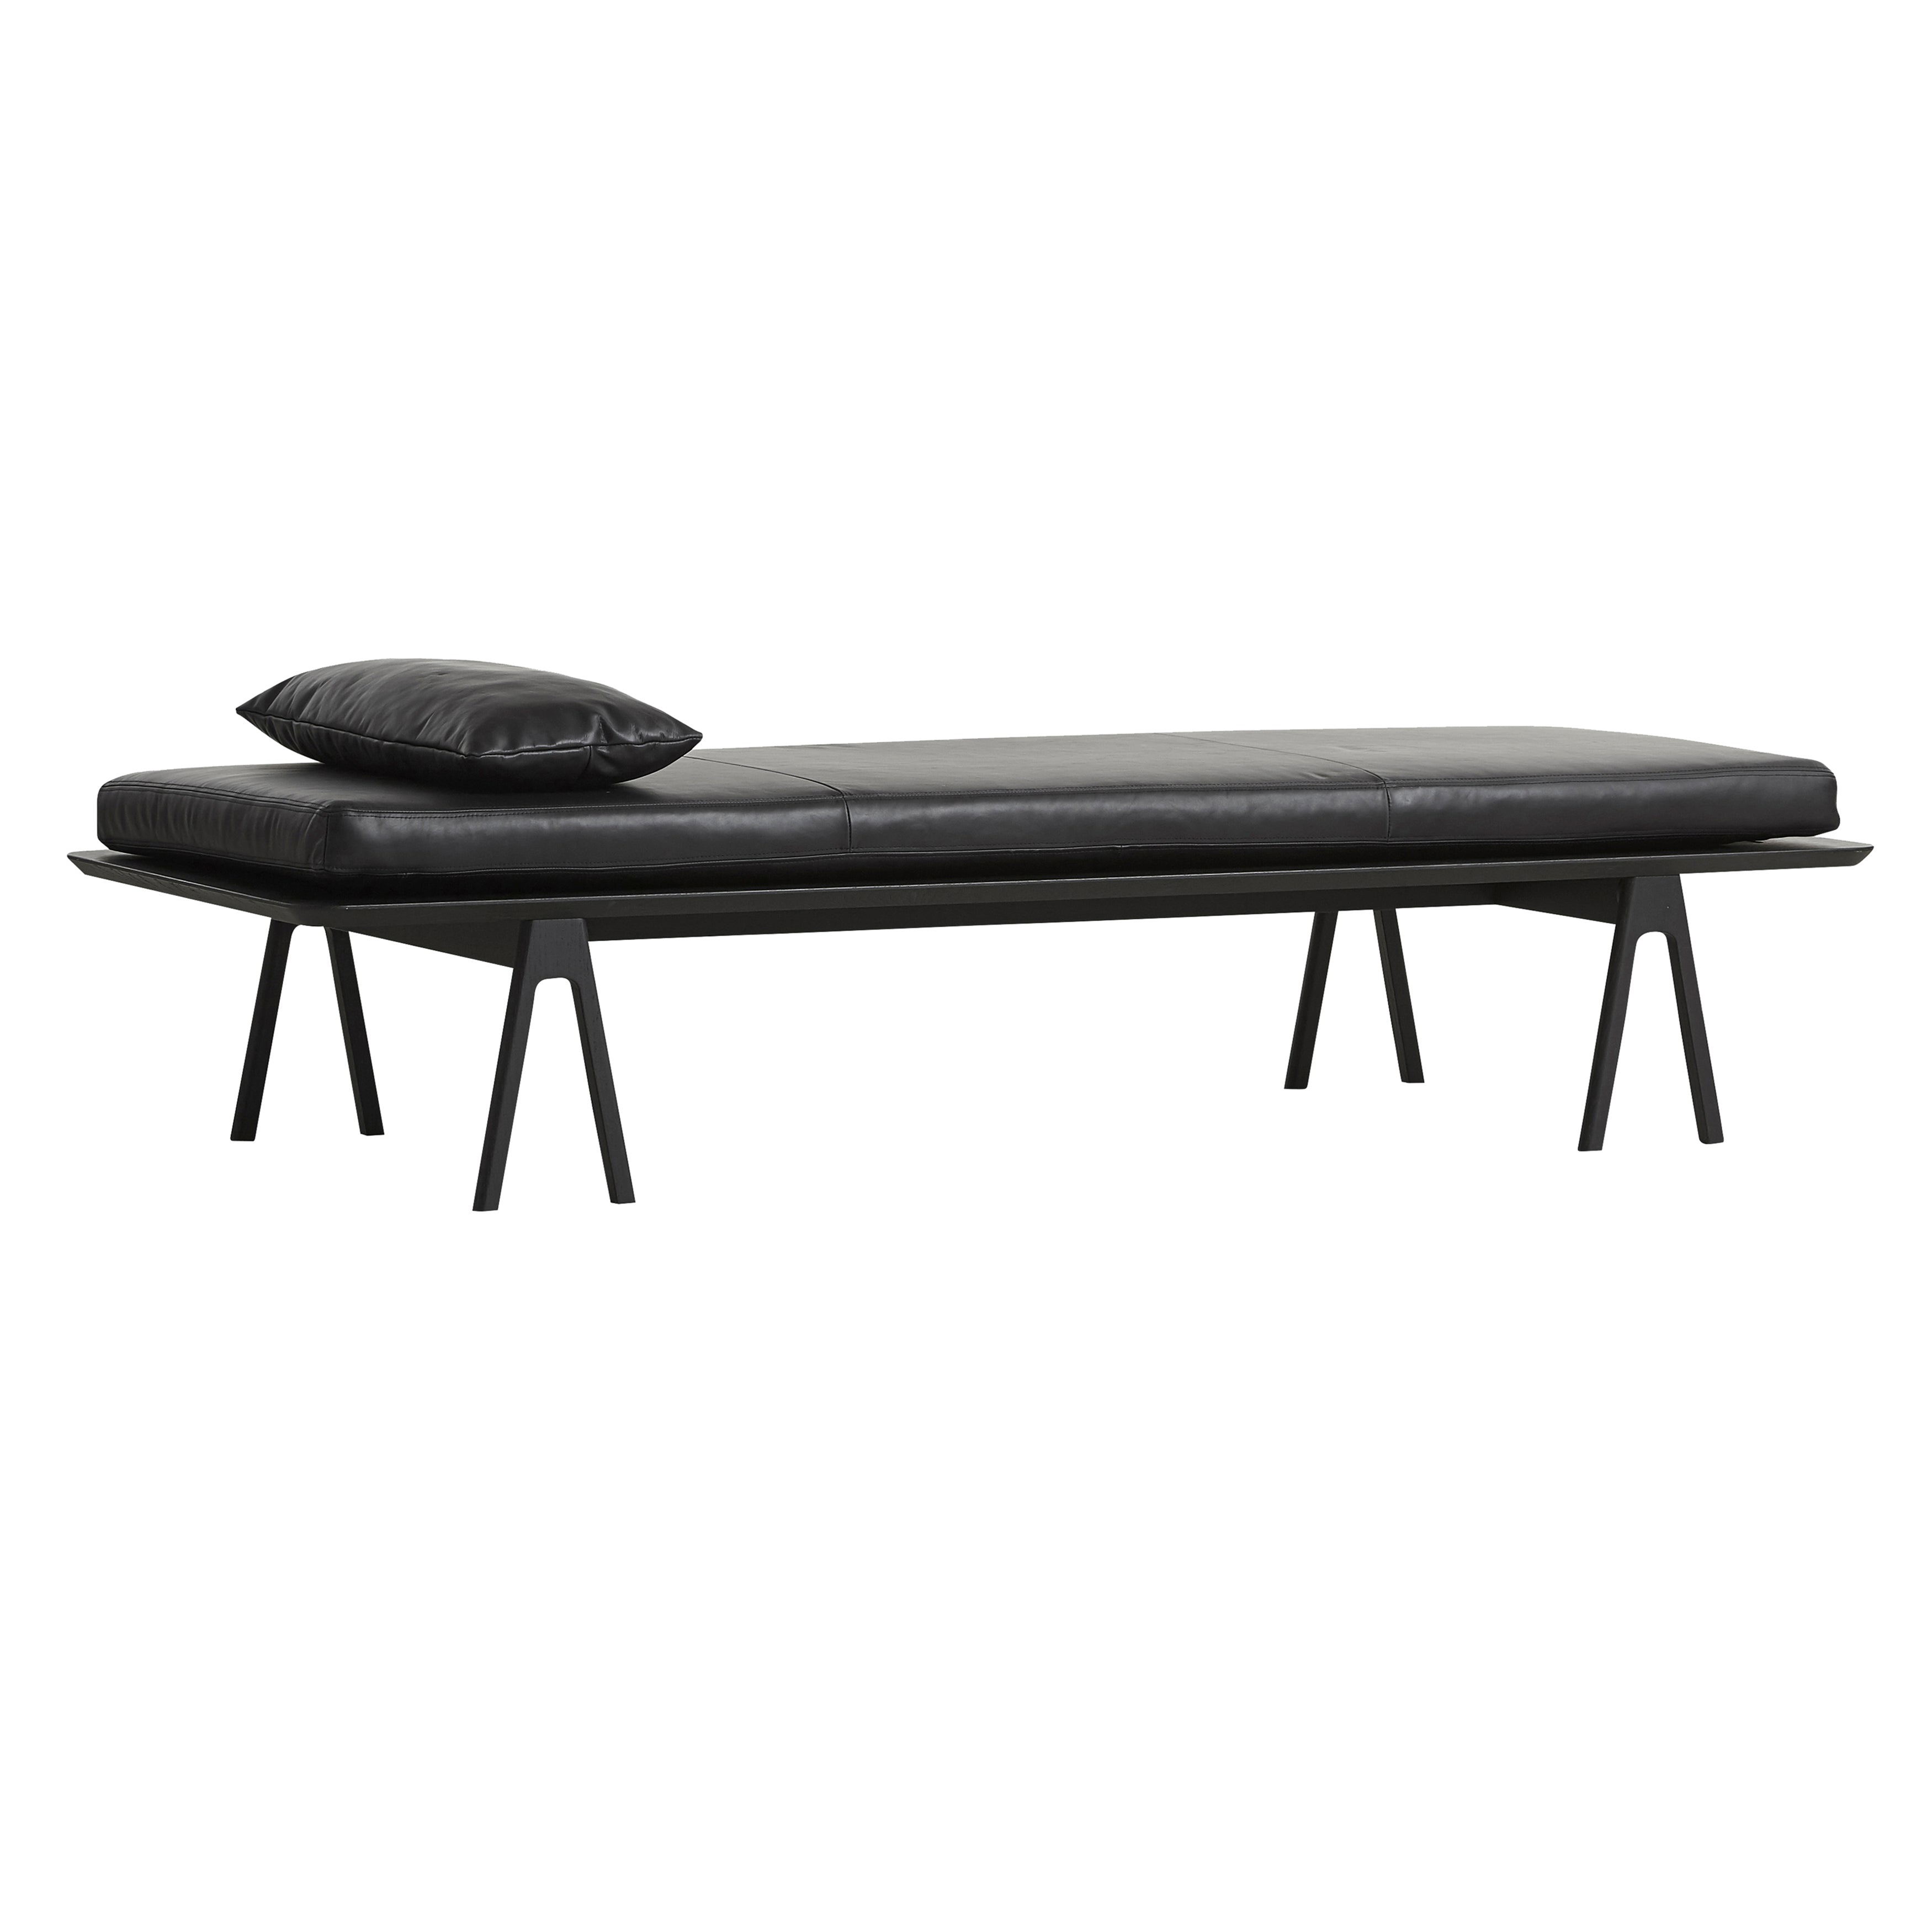 Level Daybed: Black Painted Oak + With Black Pillow + Black Leather